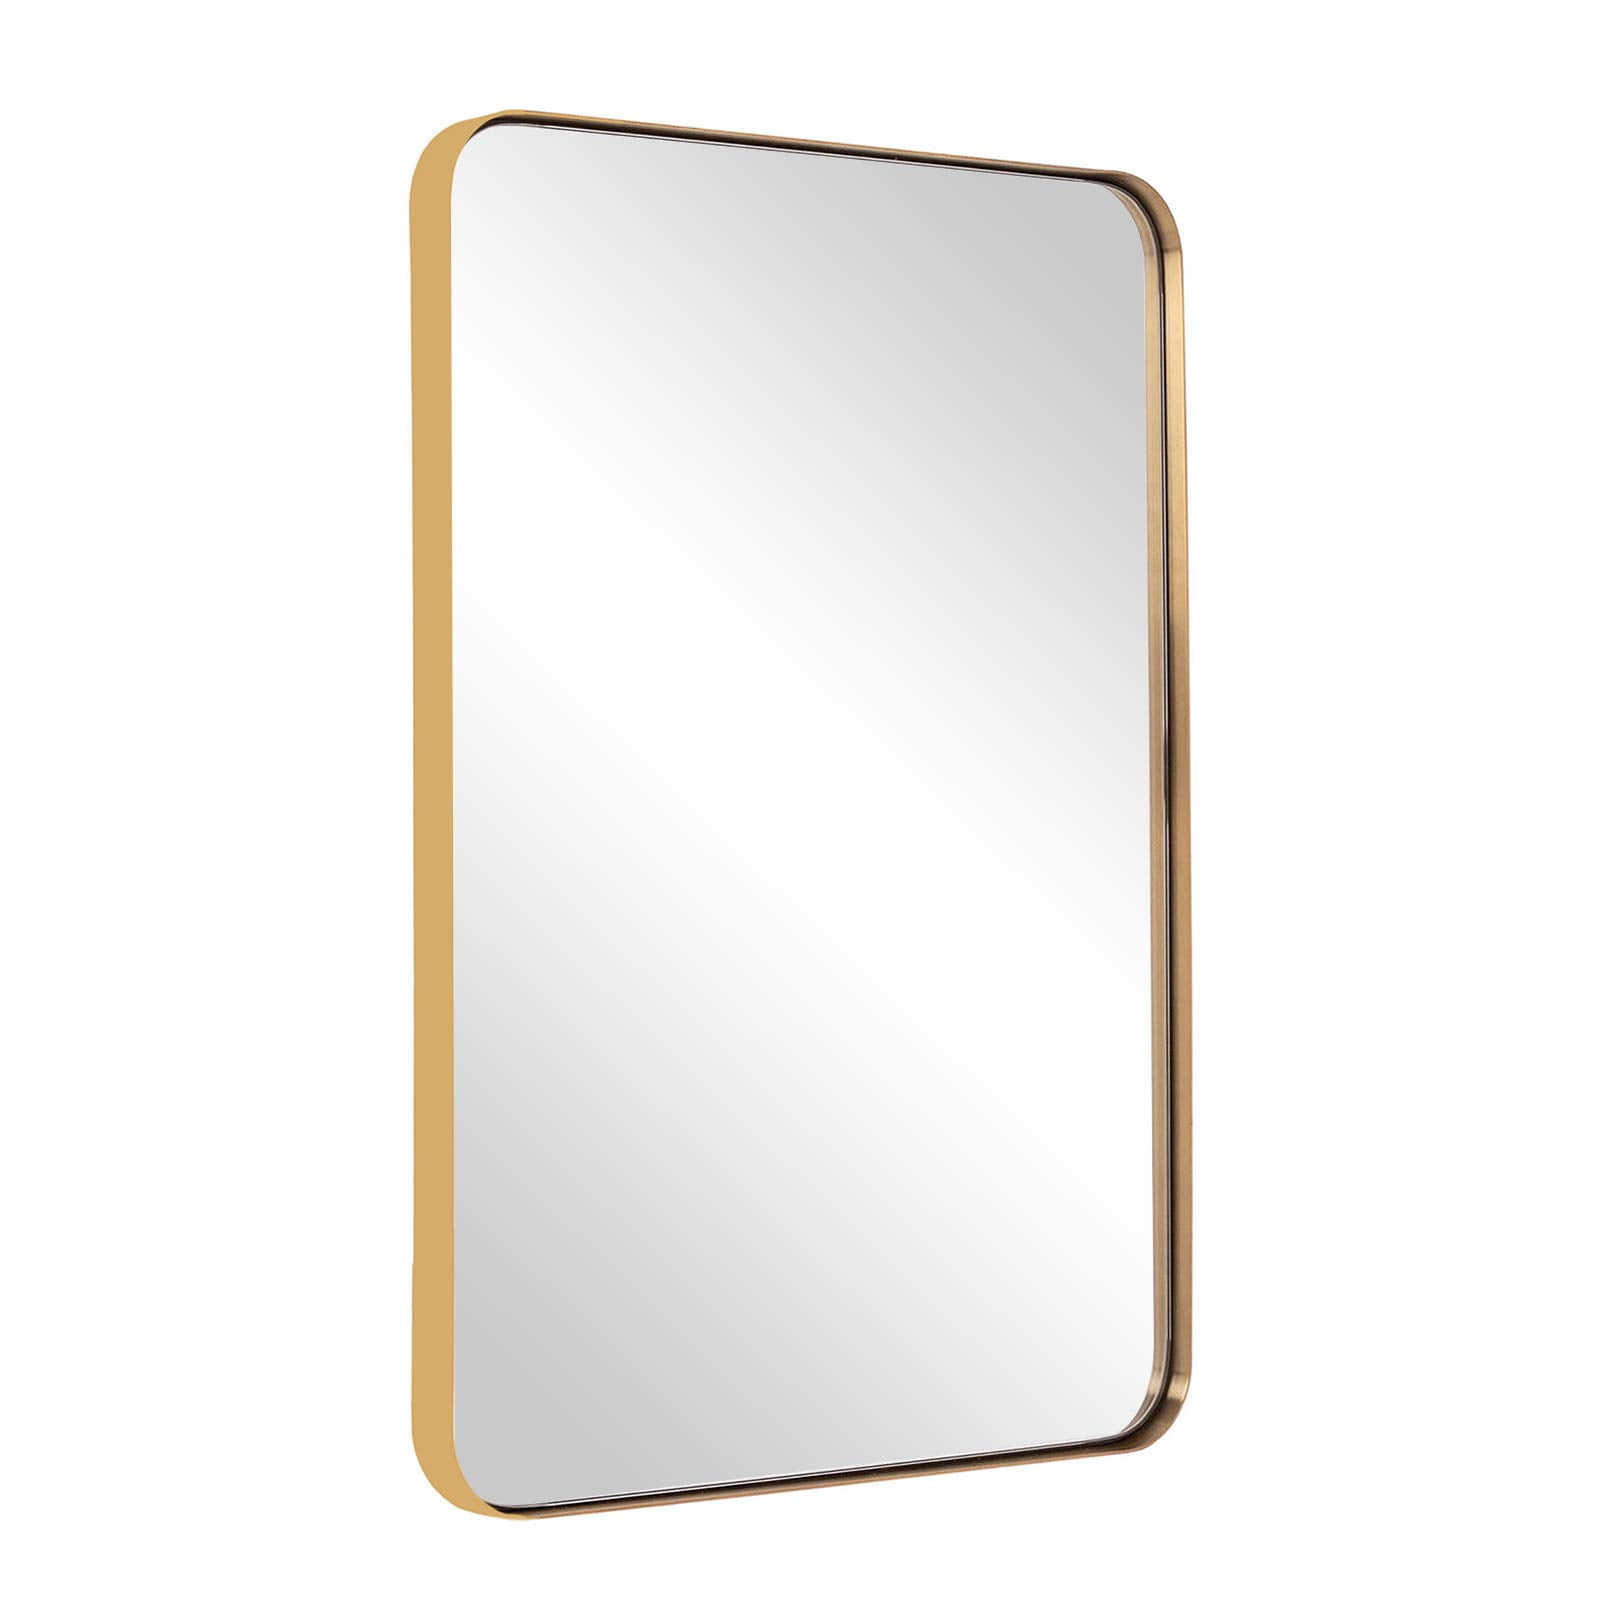 Andy Star Gold Wall Mirror, 24x36 Inch Mirror for Bathroom, Brushed Brass  Stainless Steel Metal Frame with Rounded Corner, Rectangle Glass Panel Wall  